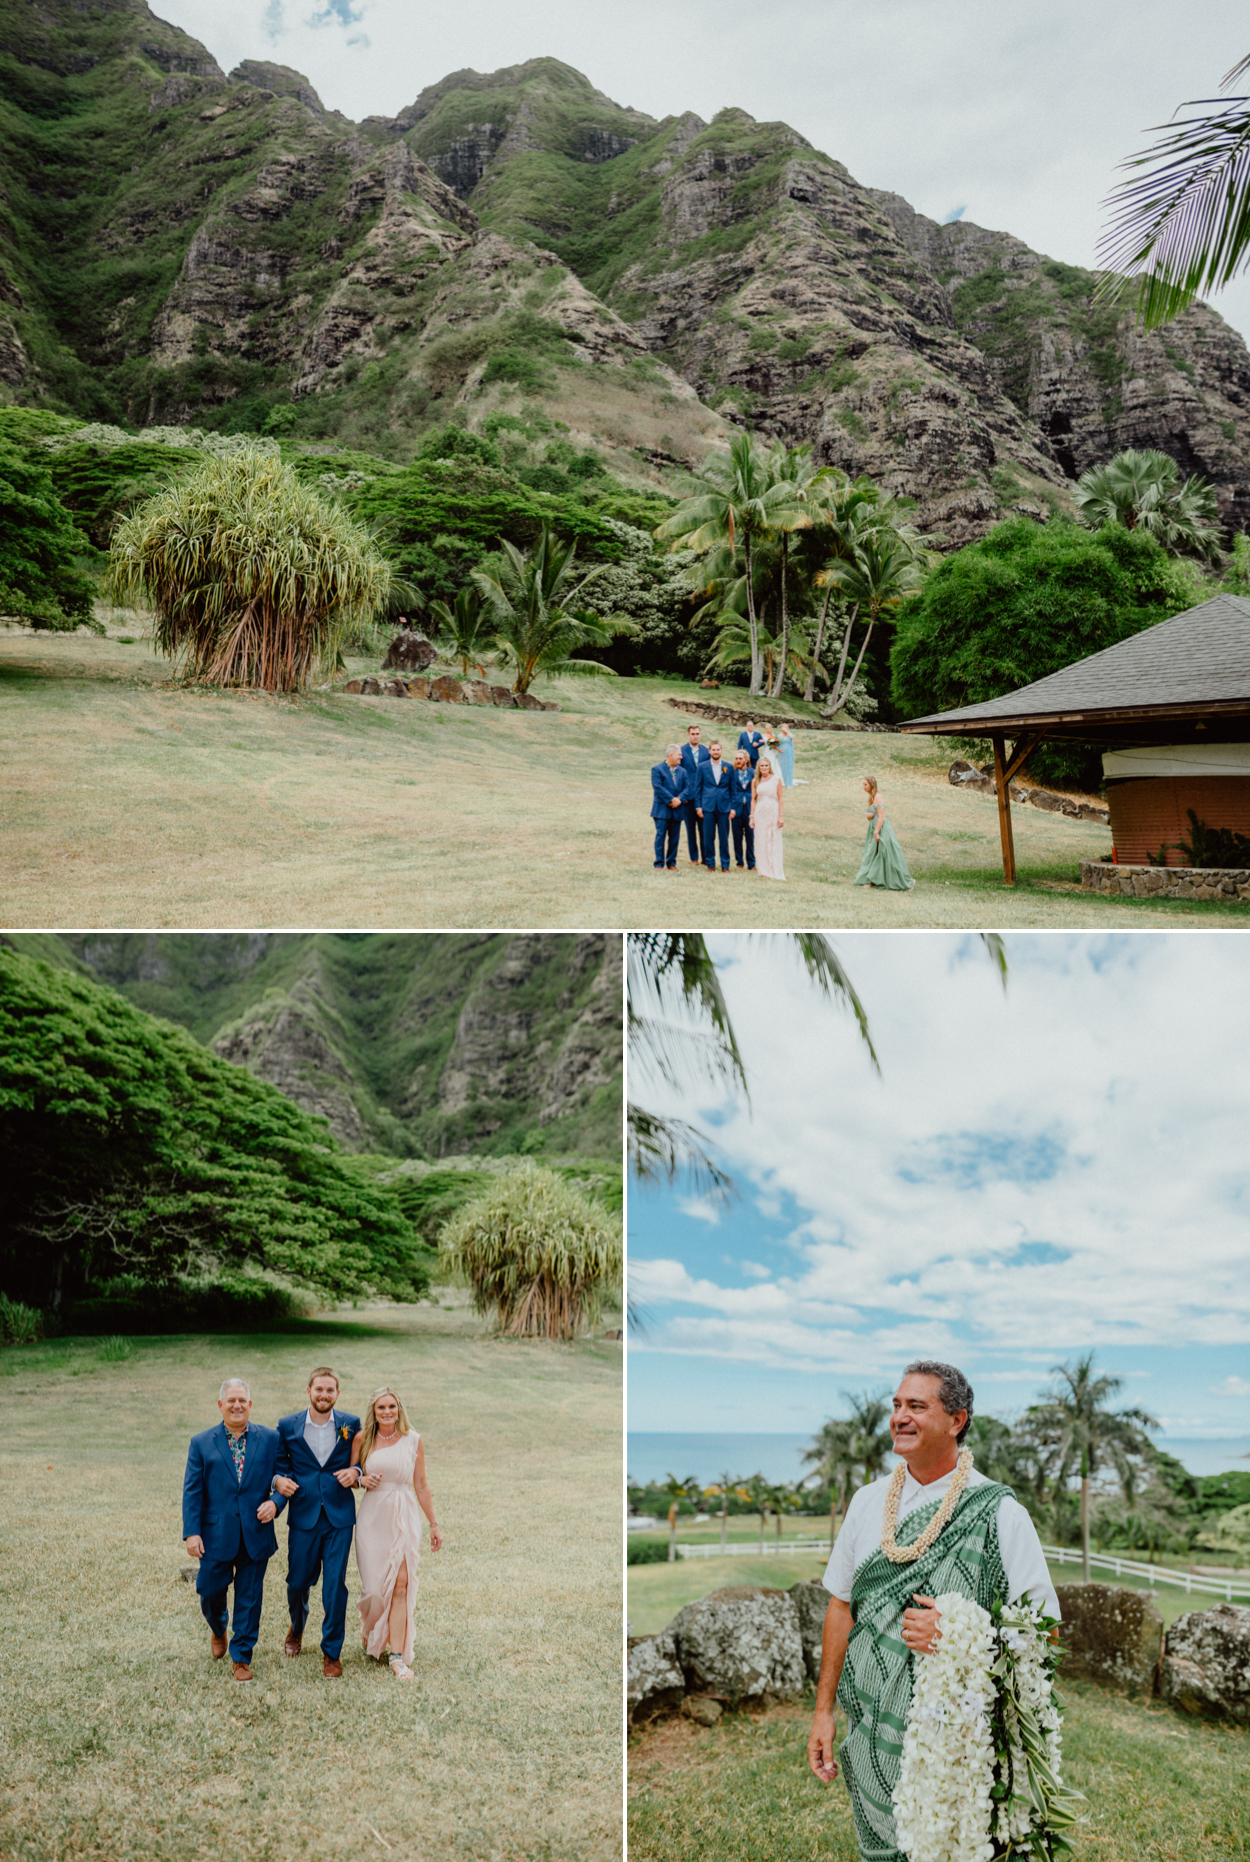 Groom escorted by his parents to his wedding ceremony in Paliku Gardens  Jurassic Park Themed Wedding